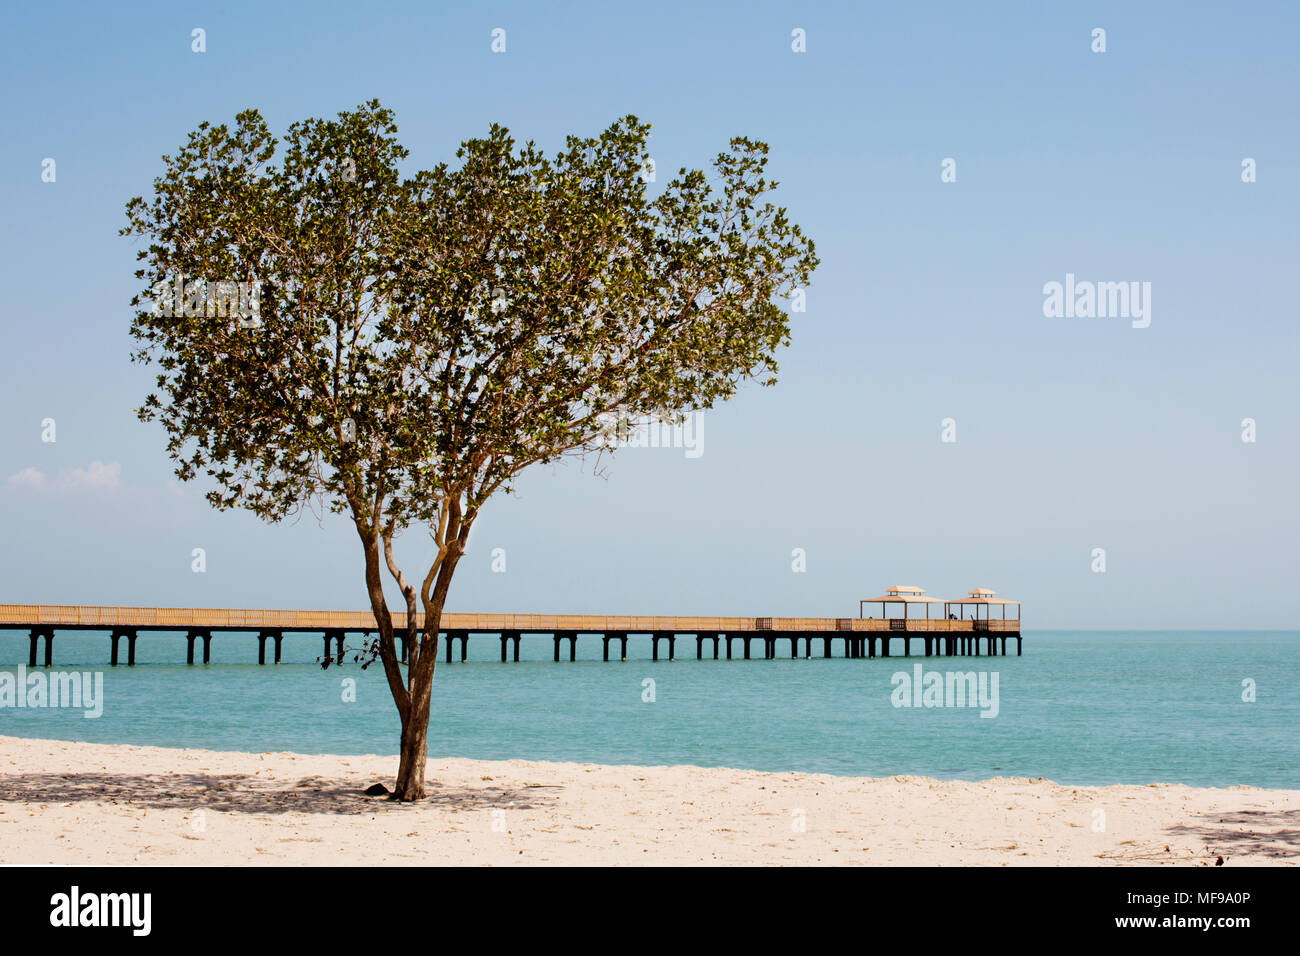 Pier and tree on the beach in Kuwait City, Kuwait Stock Photo